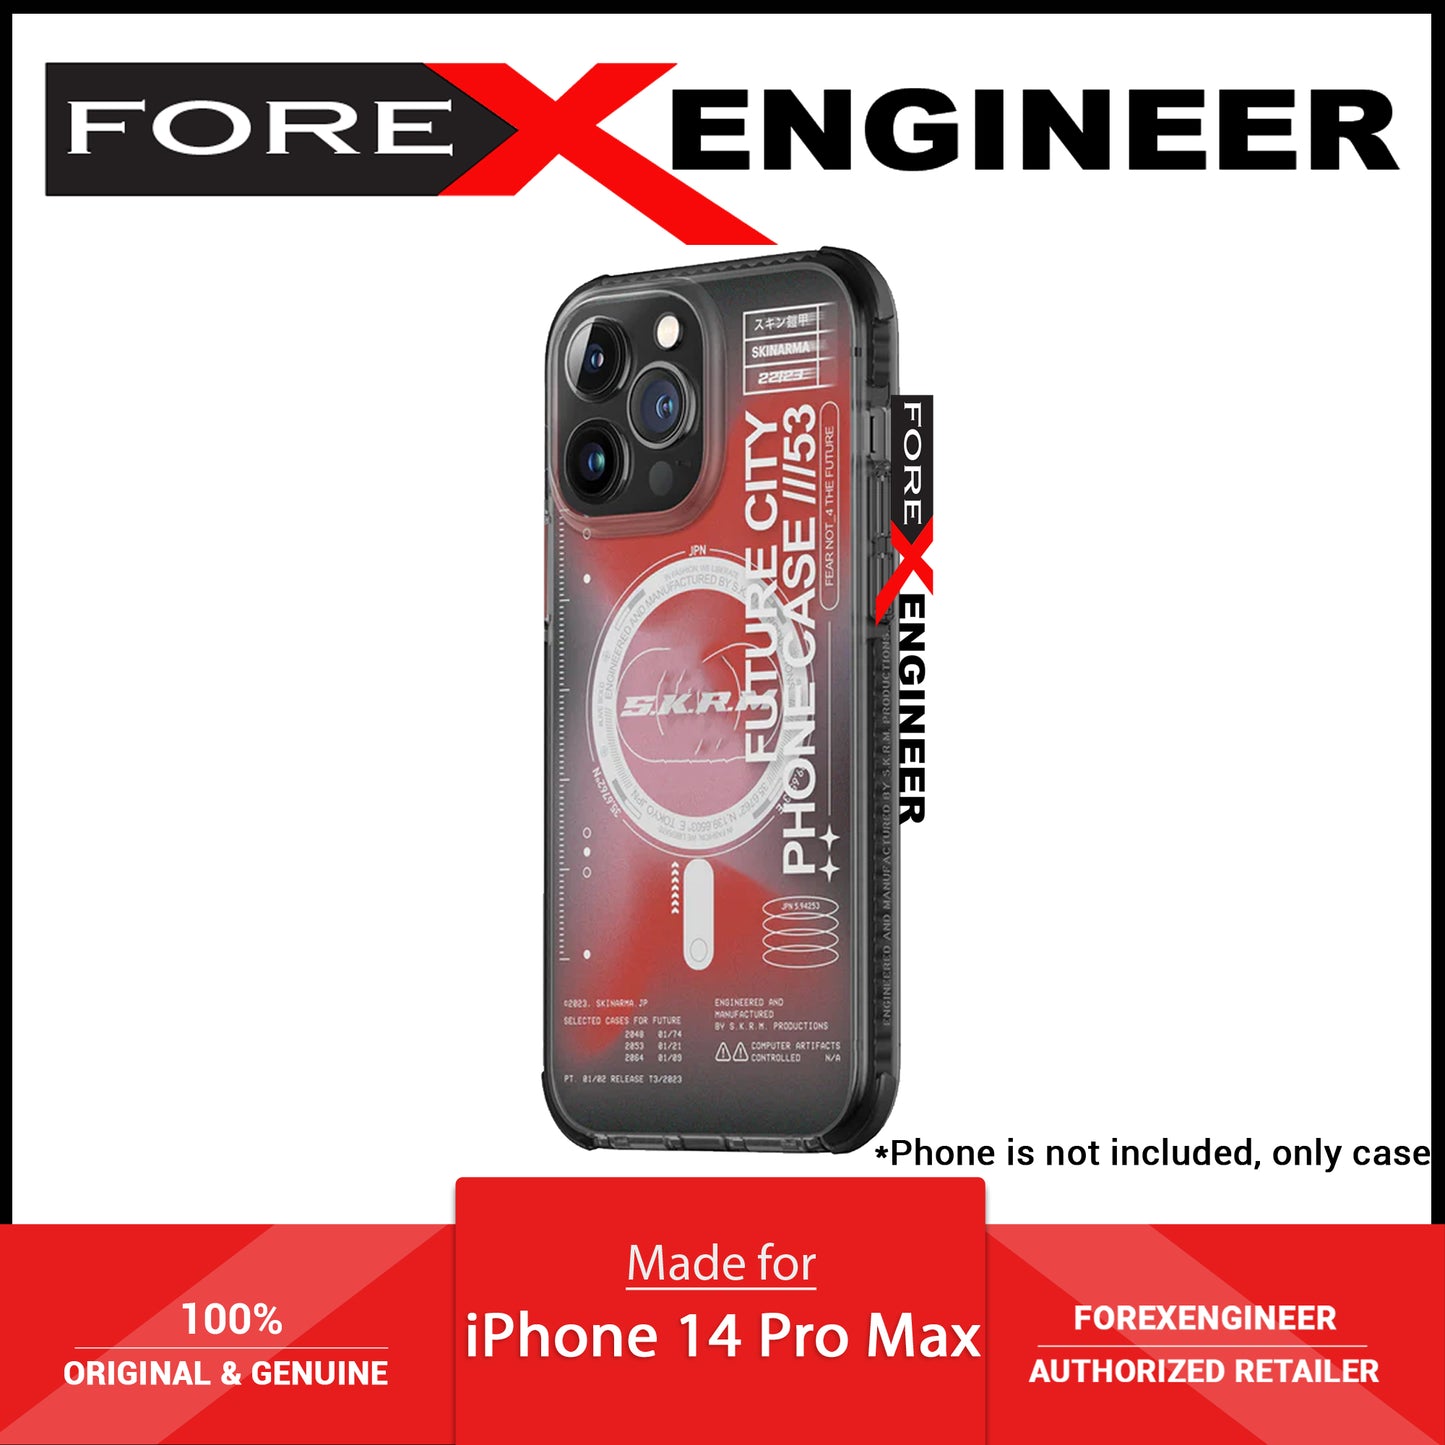 [ONLINE ONLY] Skinarma Shorai with Mag Charge for iPhone 14 Pro Max - Magsafe Compatible - Red ( Barcode: 8886461242676 )